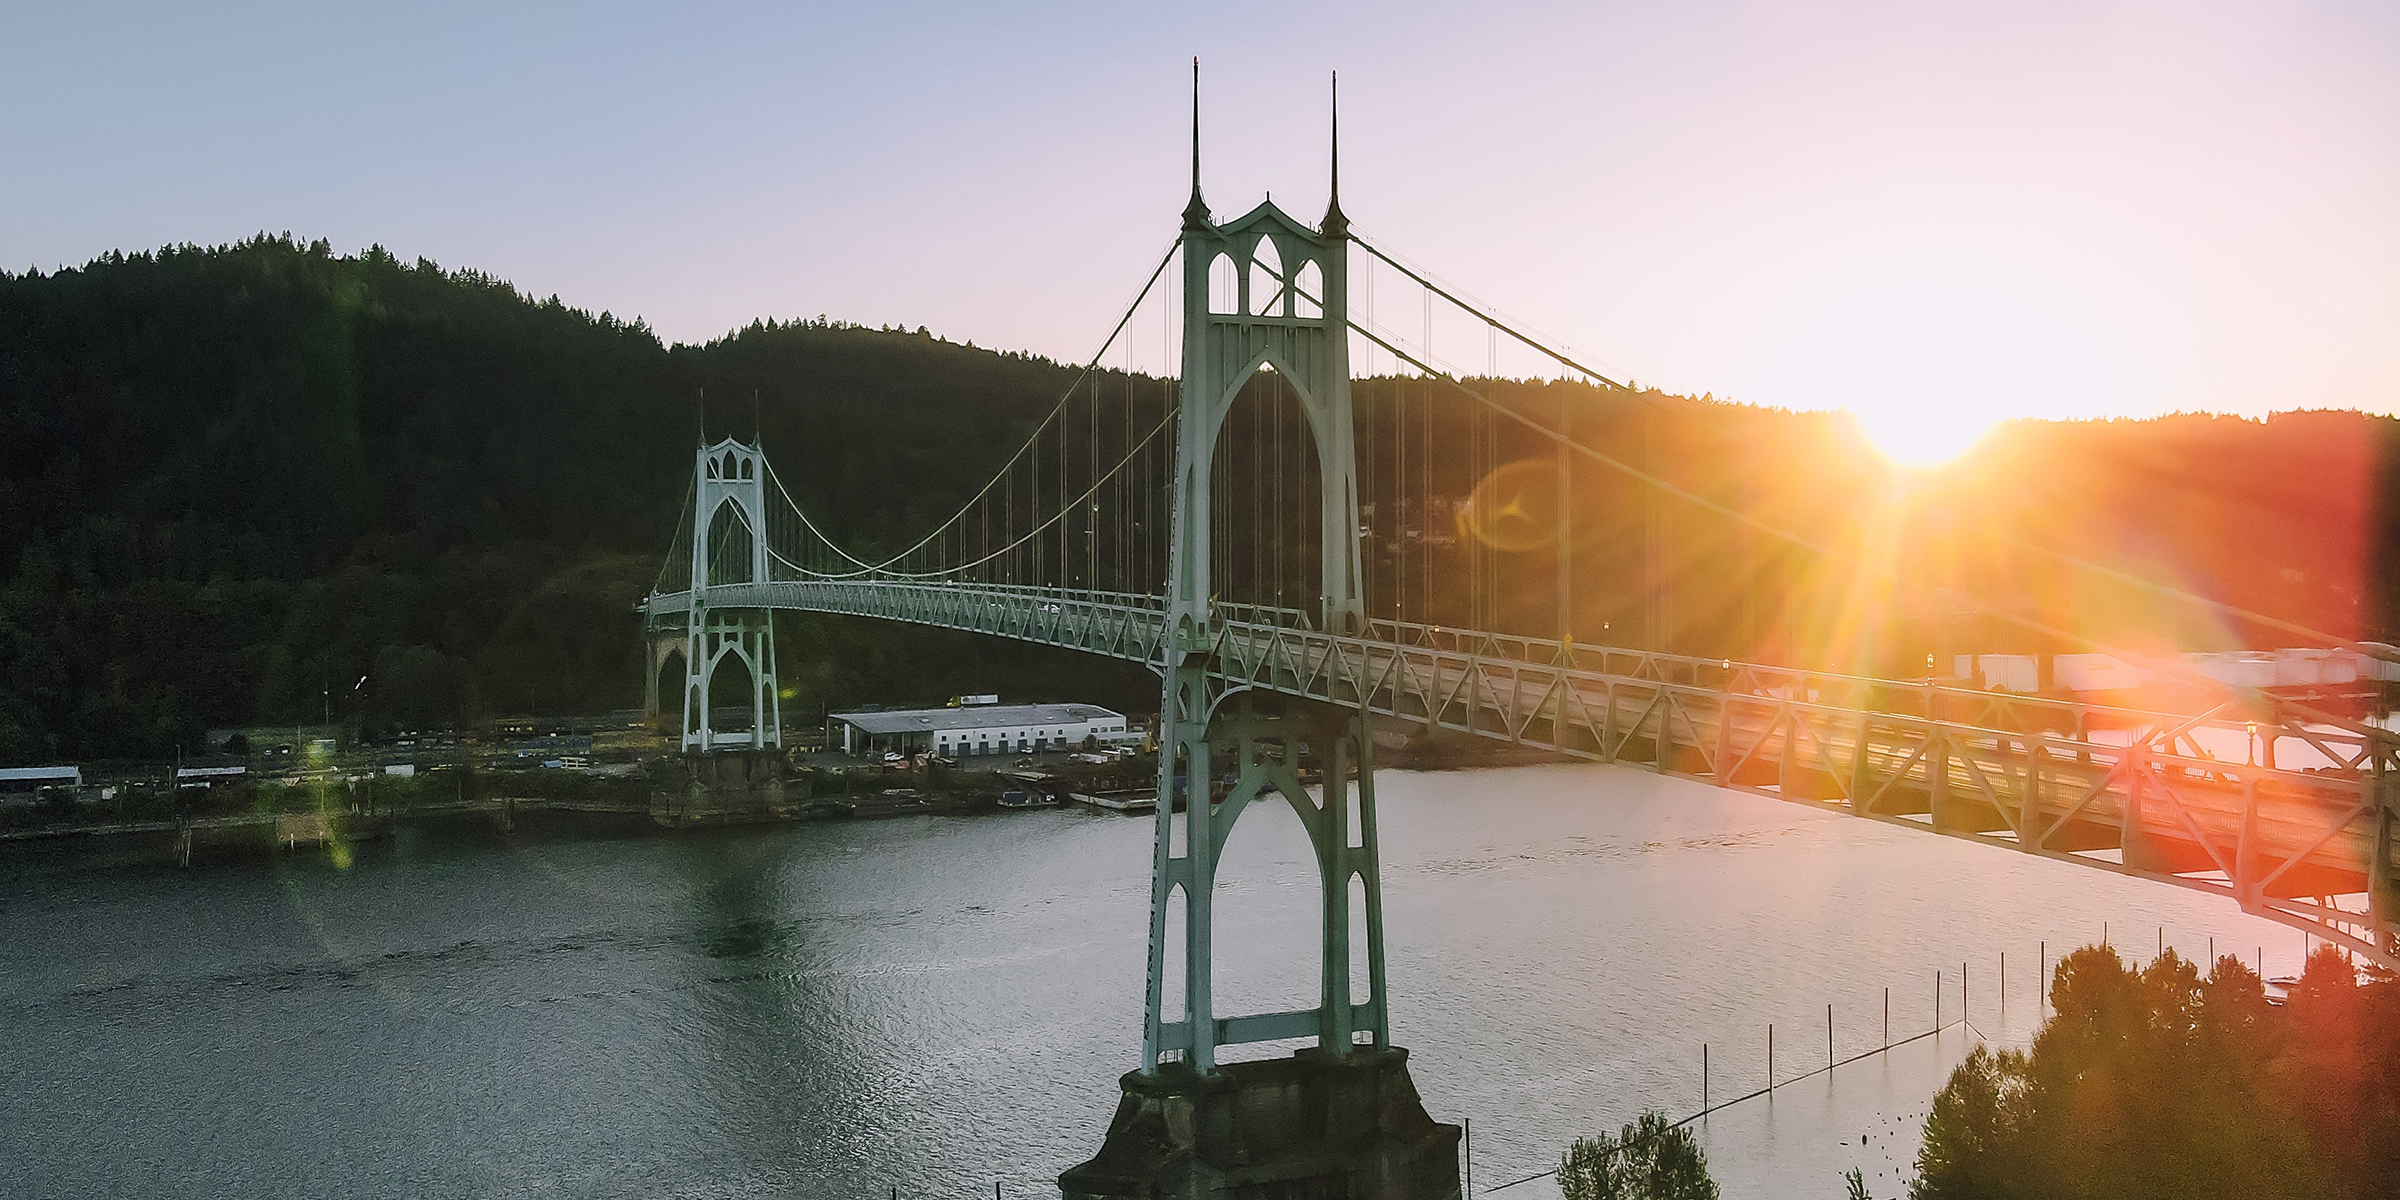 View from above of St John's large steel suspension bridge spanning Willamette River with sun setting in background